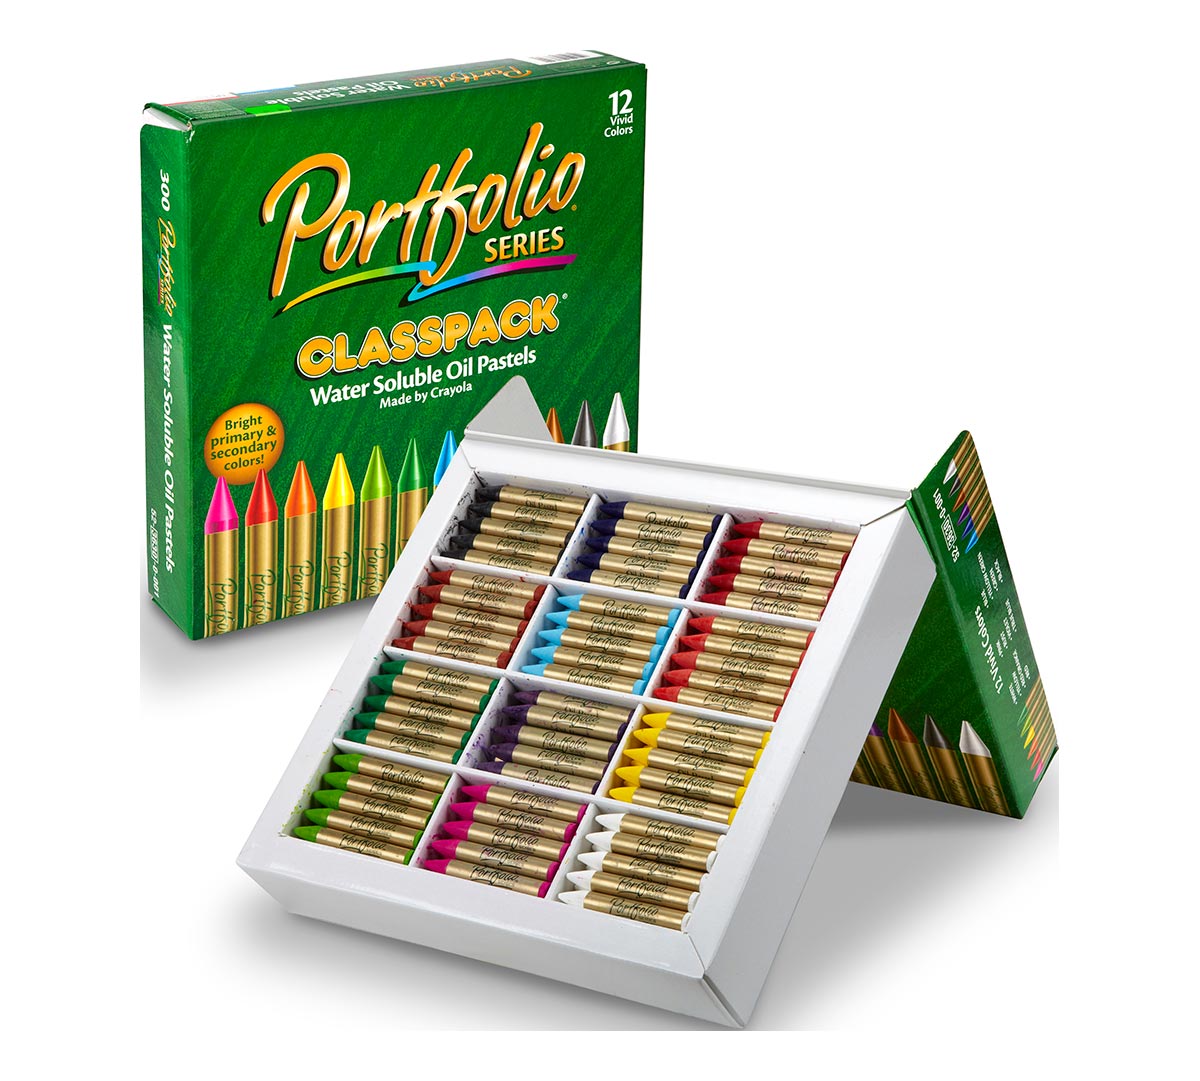 Oil Pastels: Crayola Portfolio Watersoluble Oil Pastels (review)